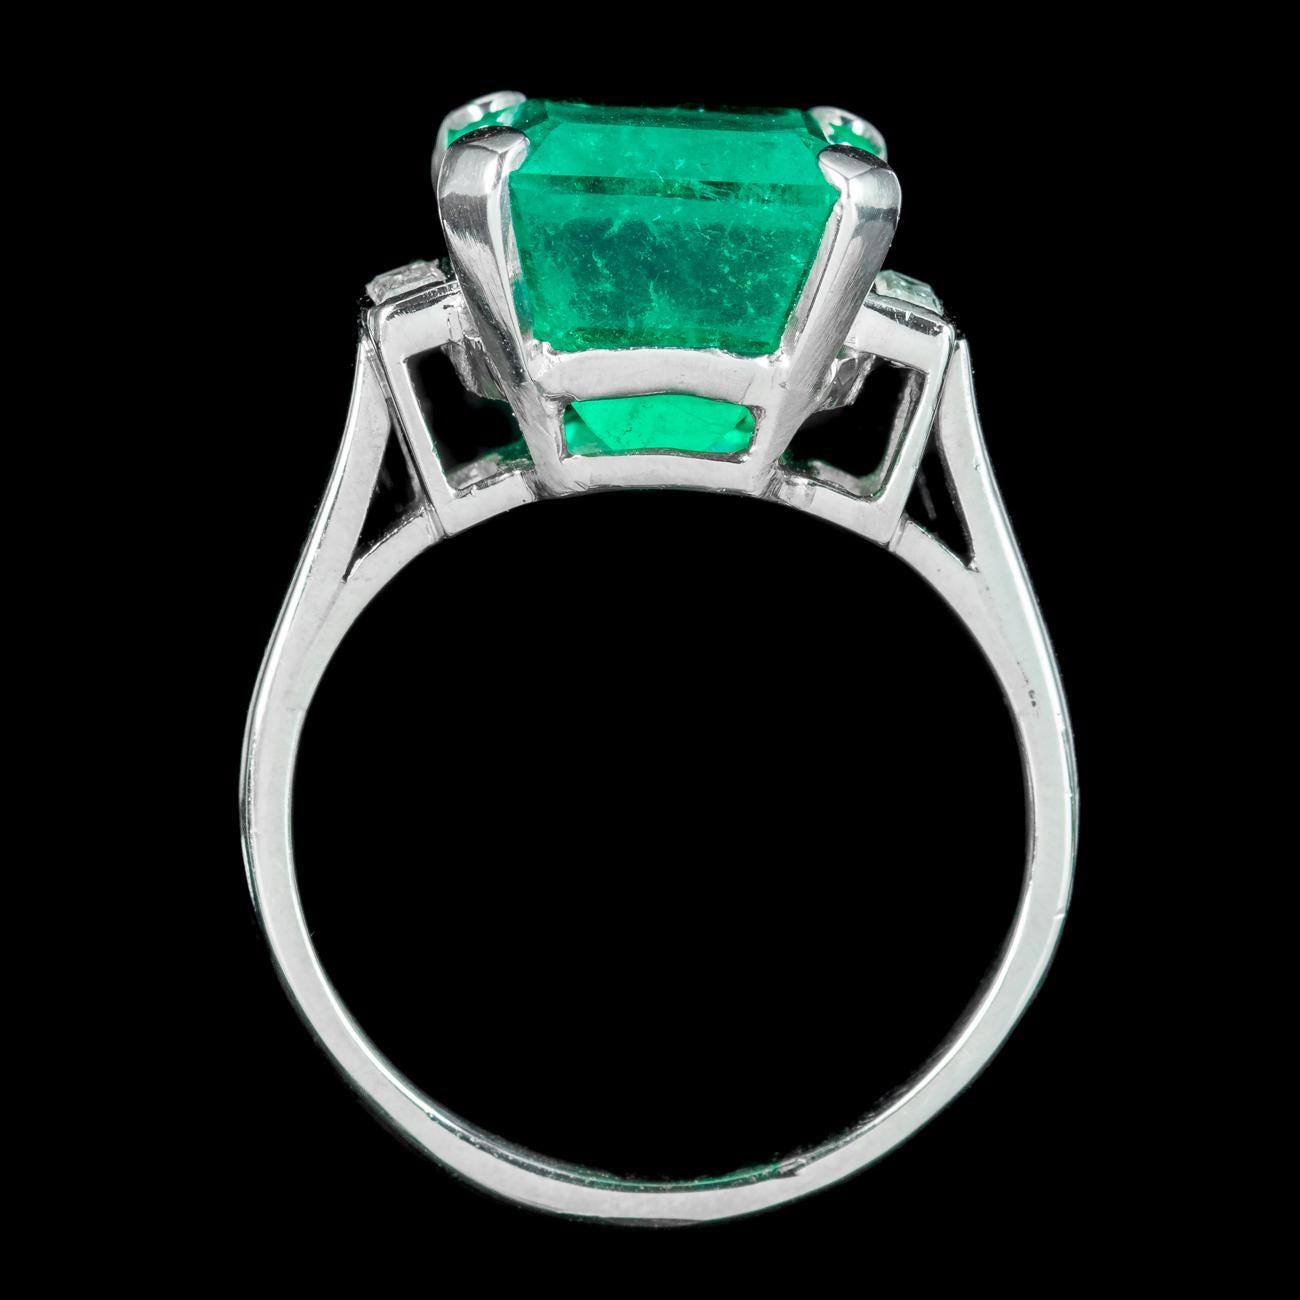 Emerald Cut Art Deco Emerald Diamond Trilogy Ring 7.24ct Colombian Emerald With Cert For Sale